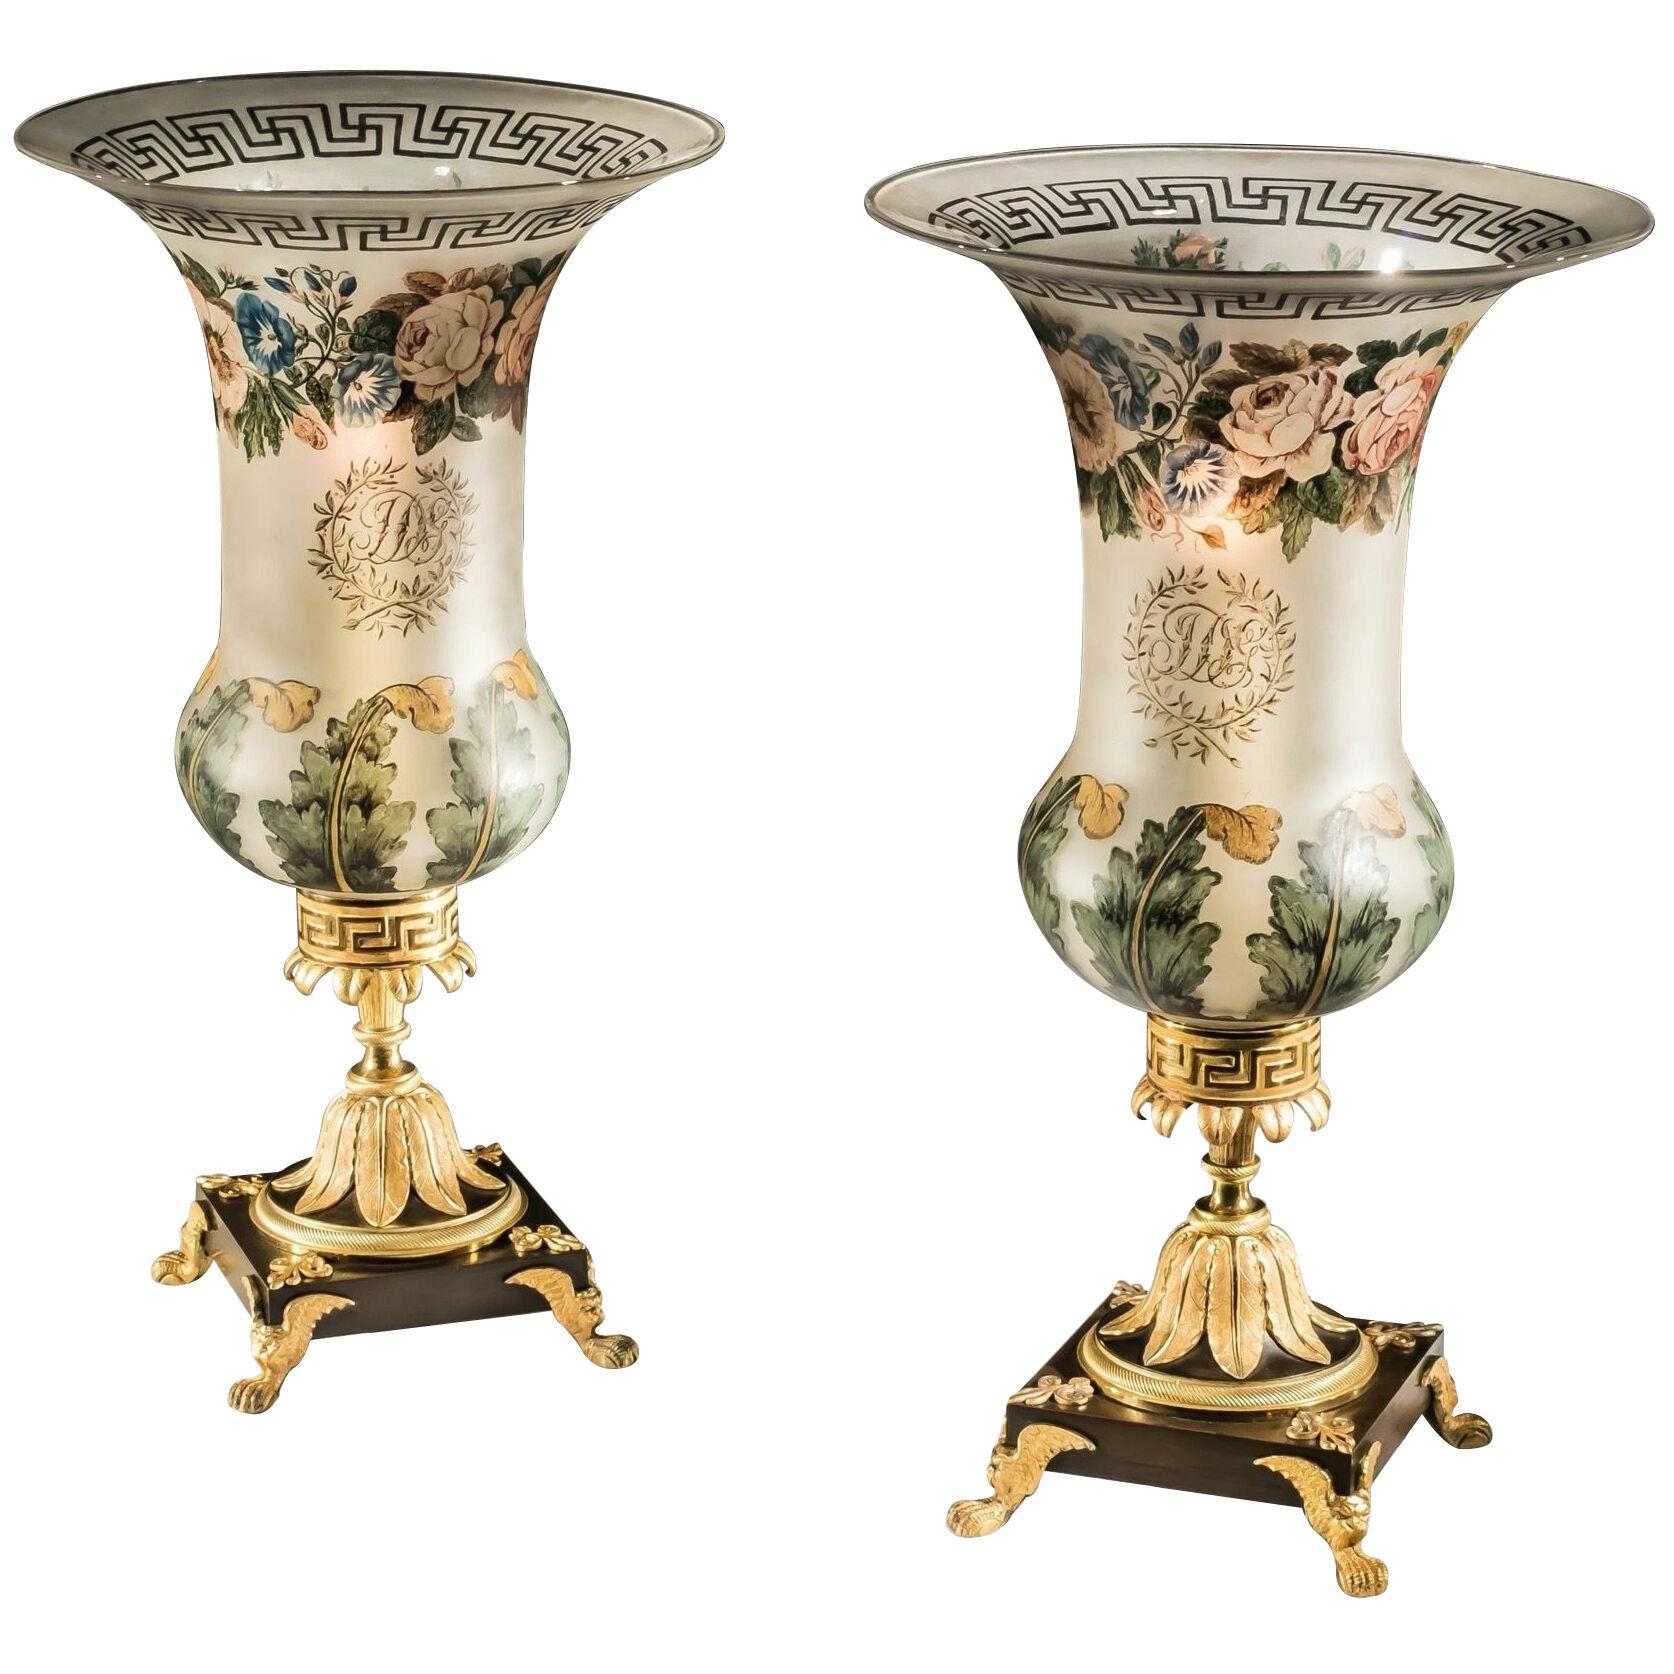 A HIGHLY UNUSUAL PAIR OF REGENCY STORM LIGHTS WITH PAINTED SHADES